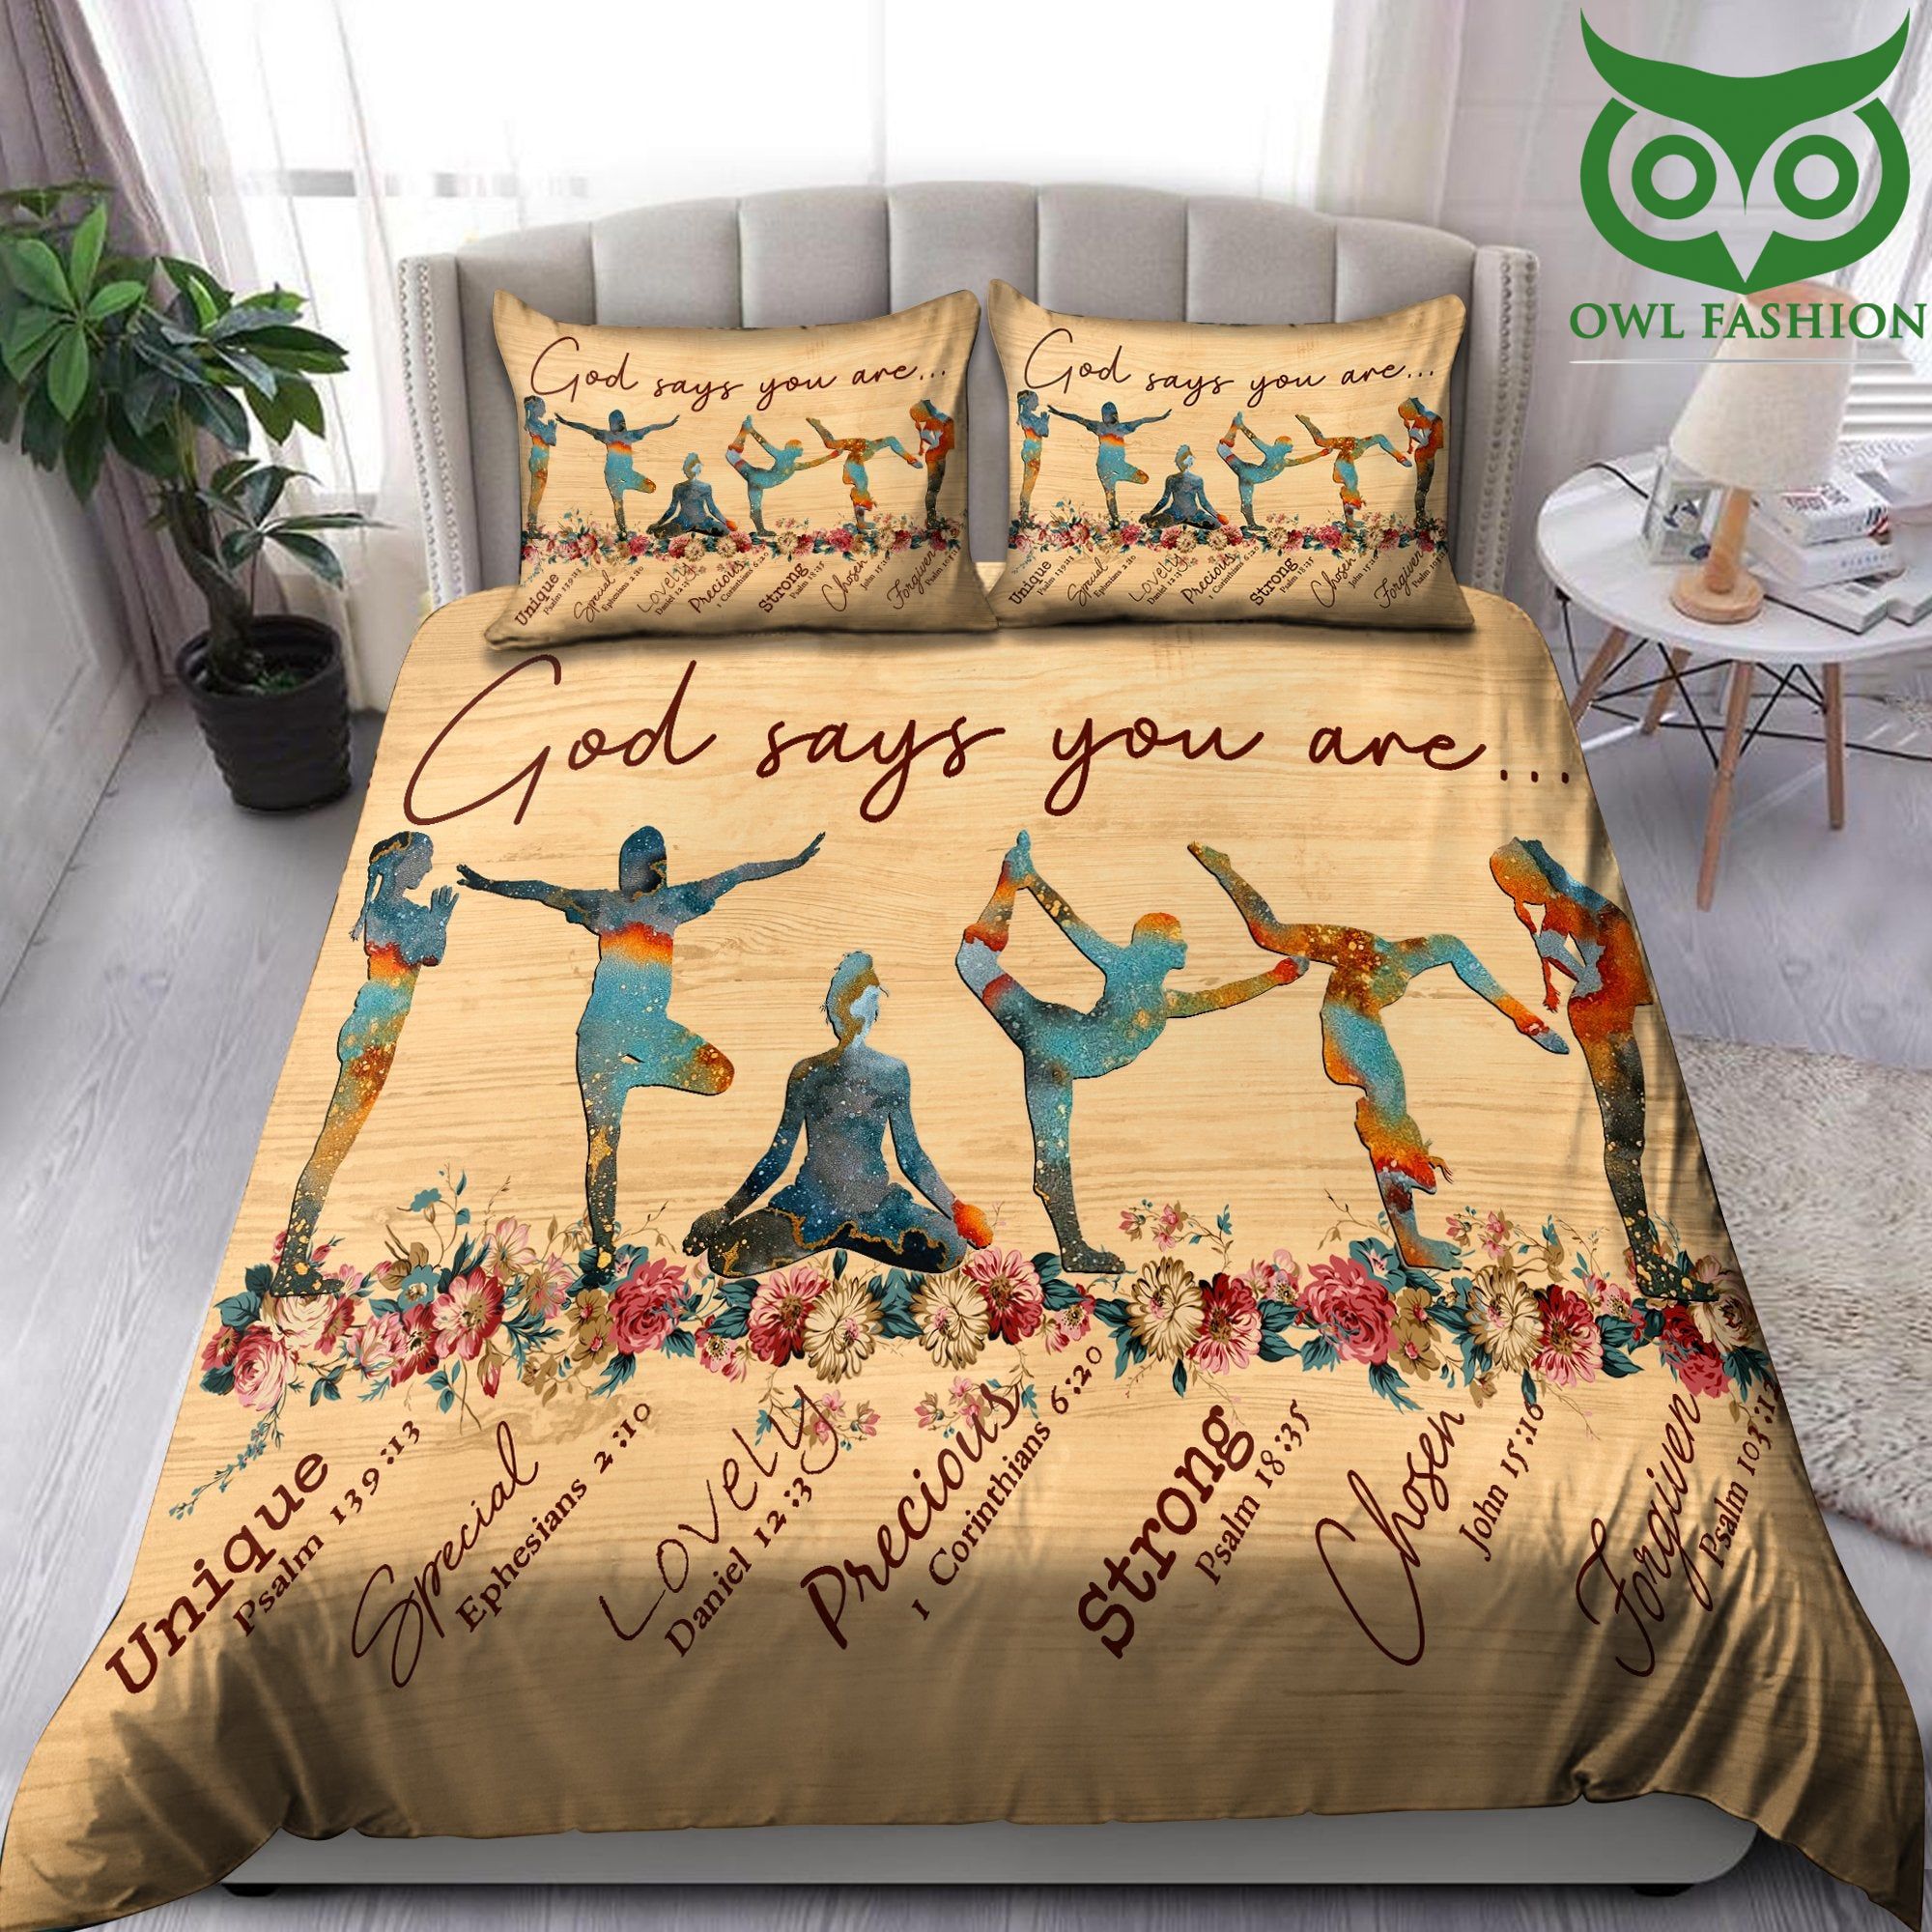 Yoga Love Peace Life Limited God say you are Bedding set 